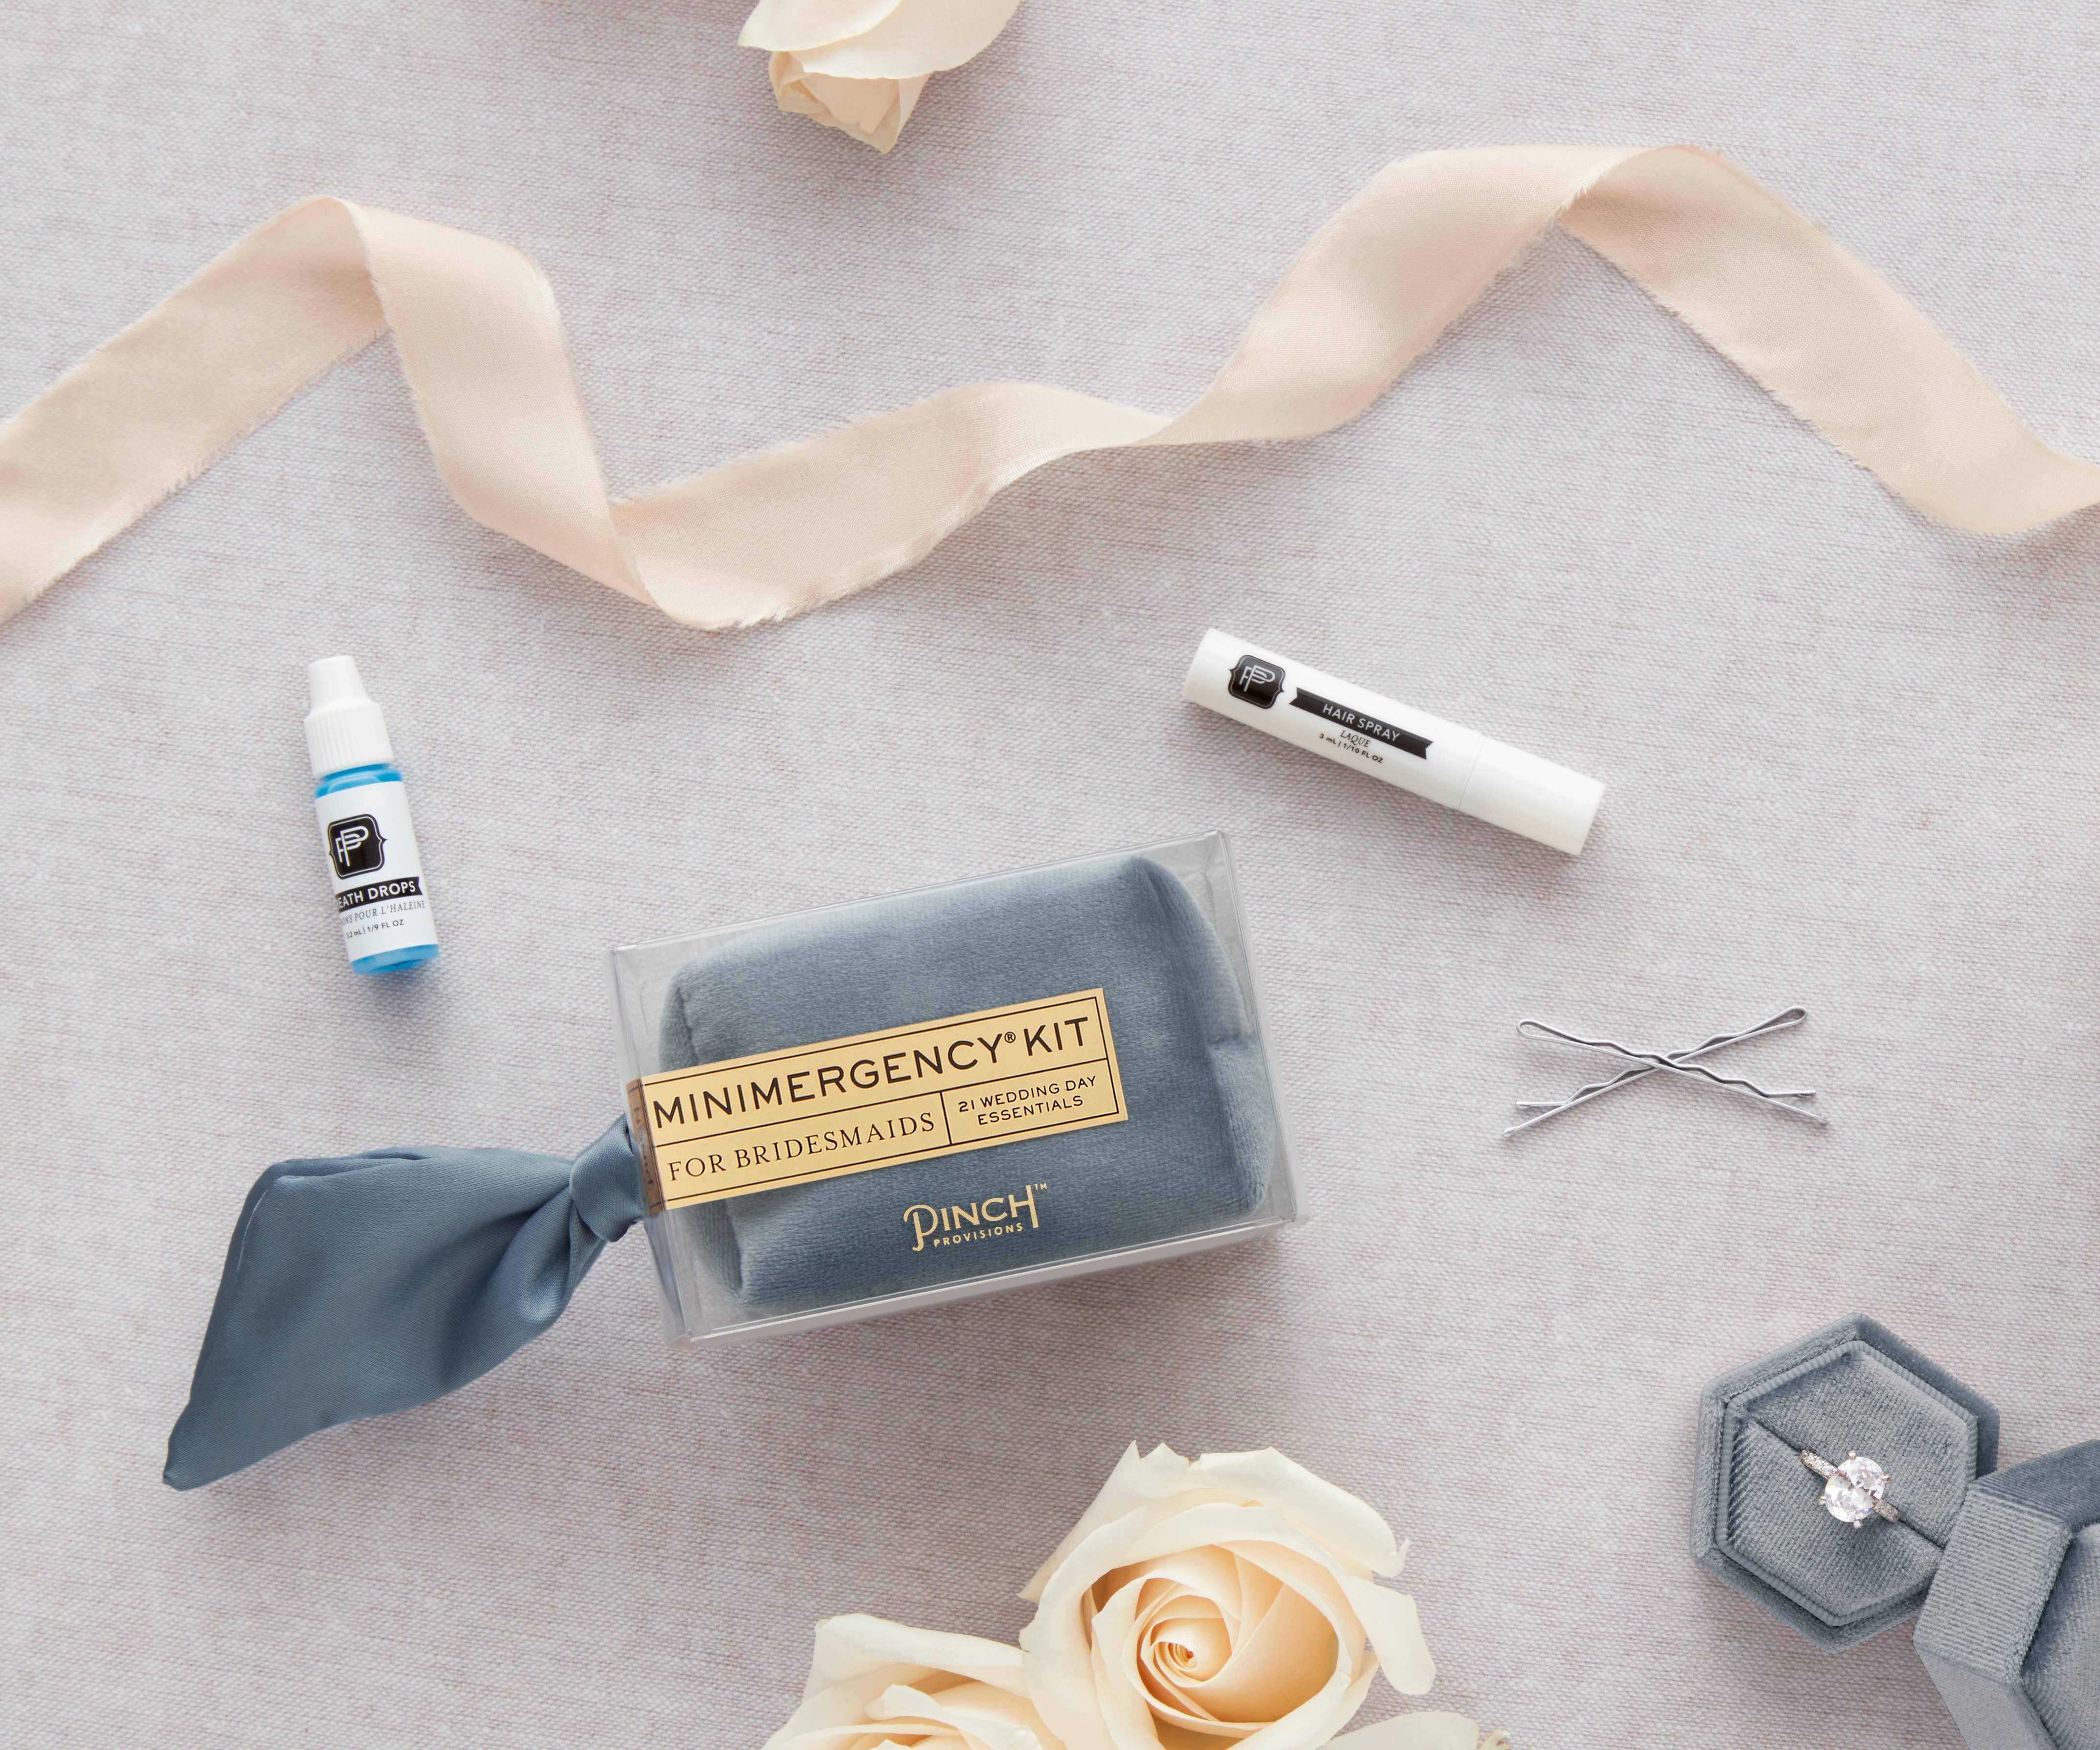 Velvet Minimergency Kits for Bridesmaids: Dusty Blue by Pinch Provisions